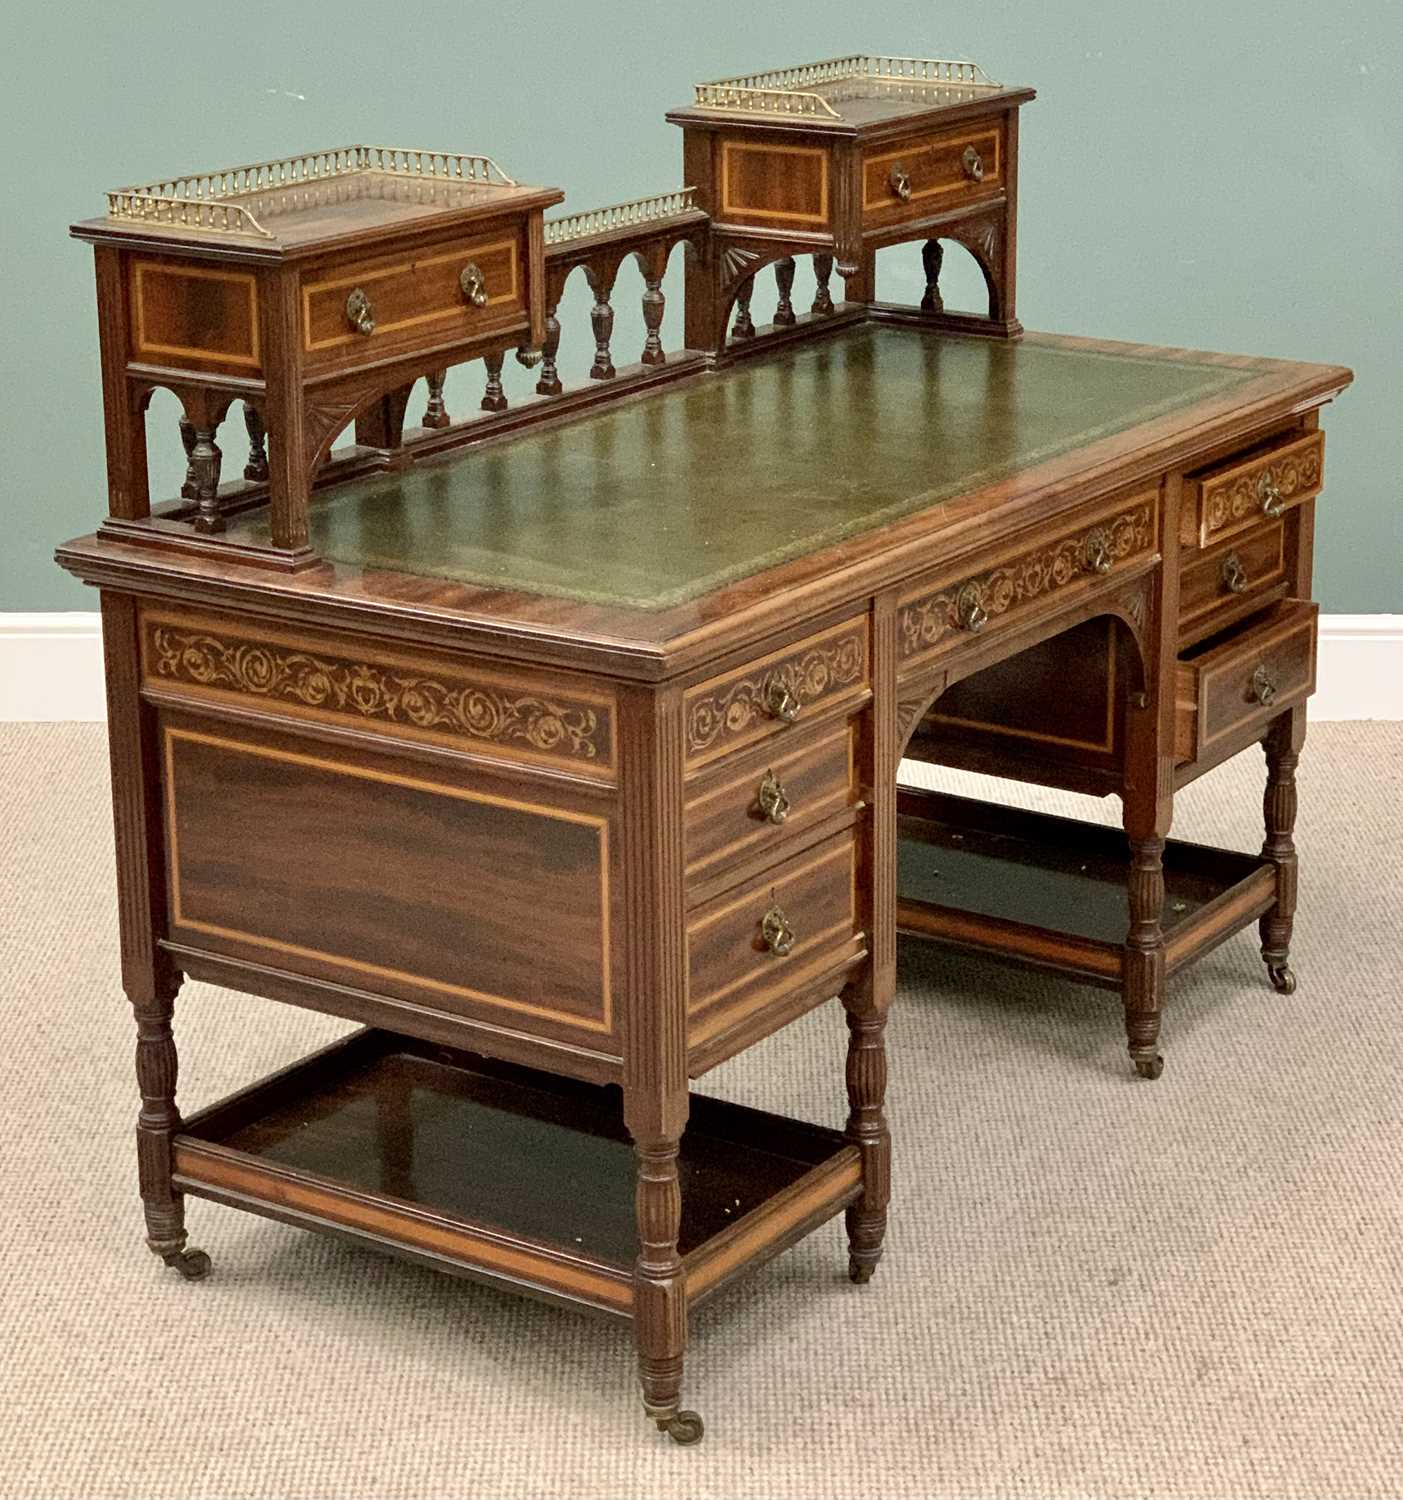 MAHOGANY DESK - fine twin pedestal example with railback and elevated drawers, inlaid detail - Image 4 of 5